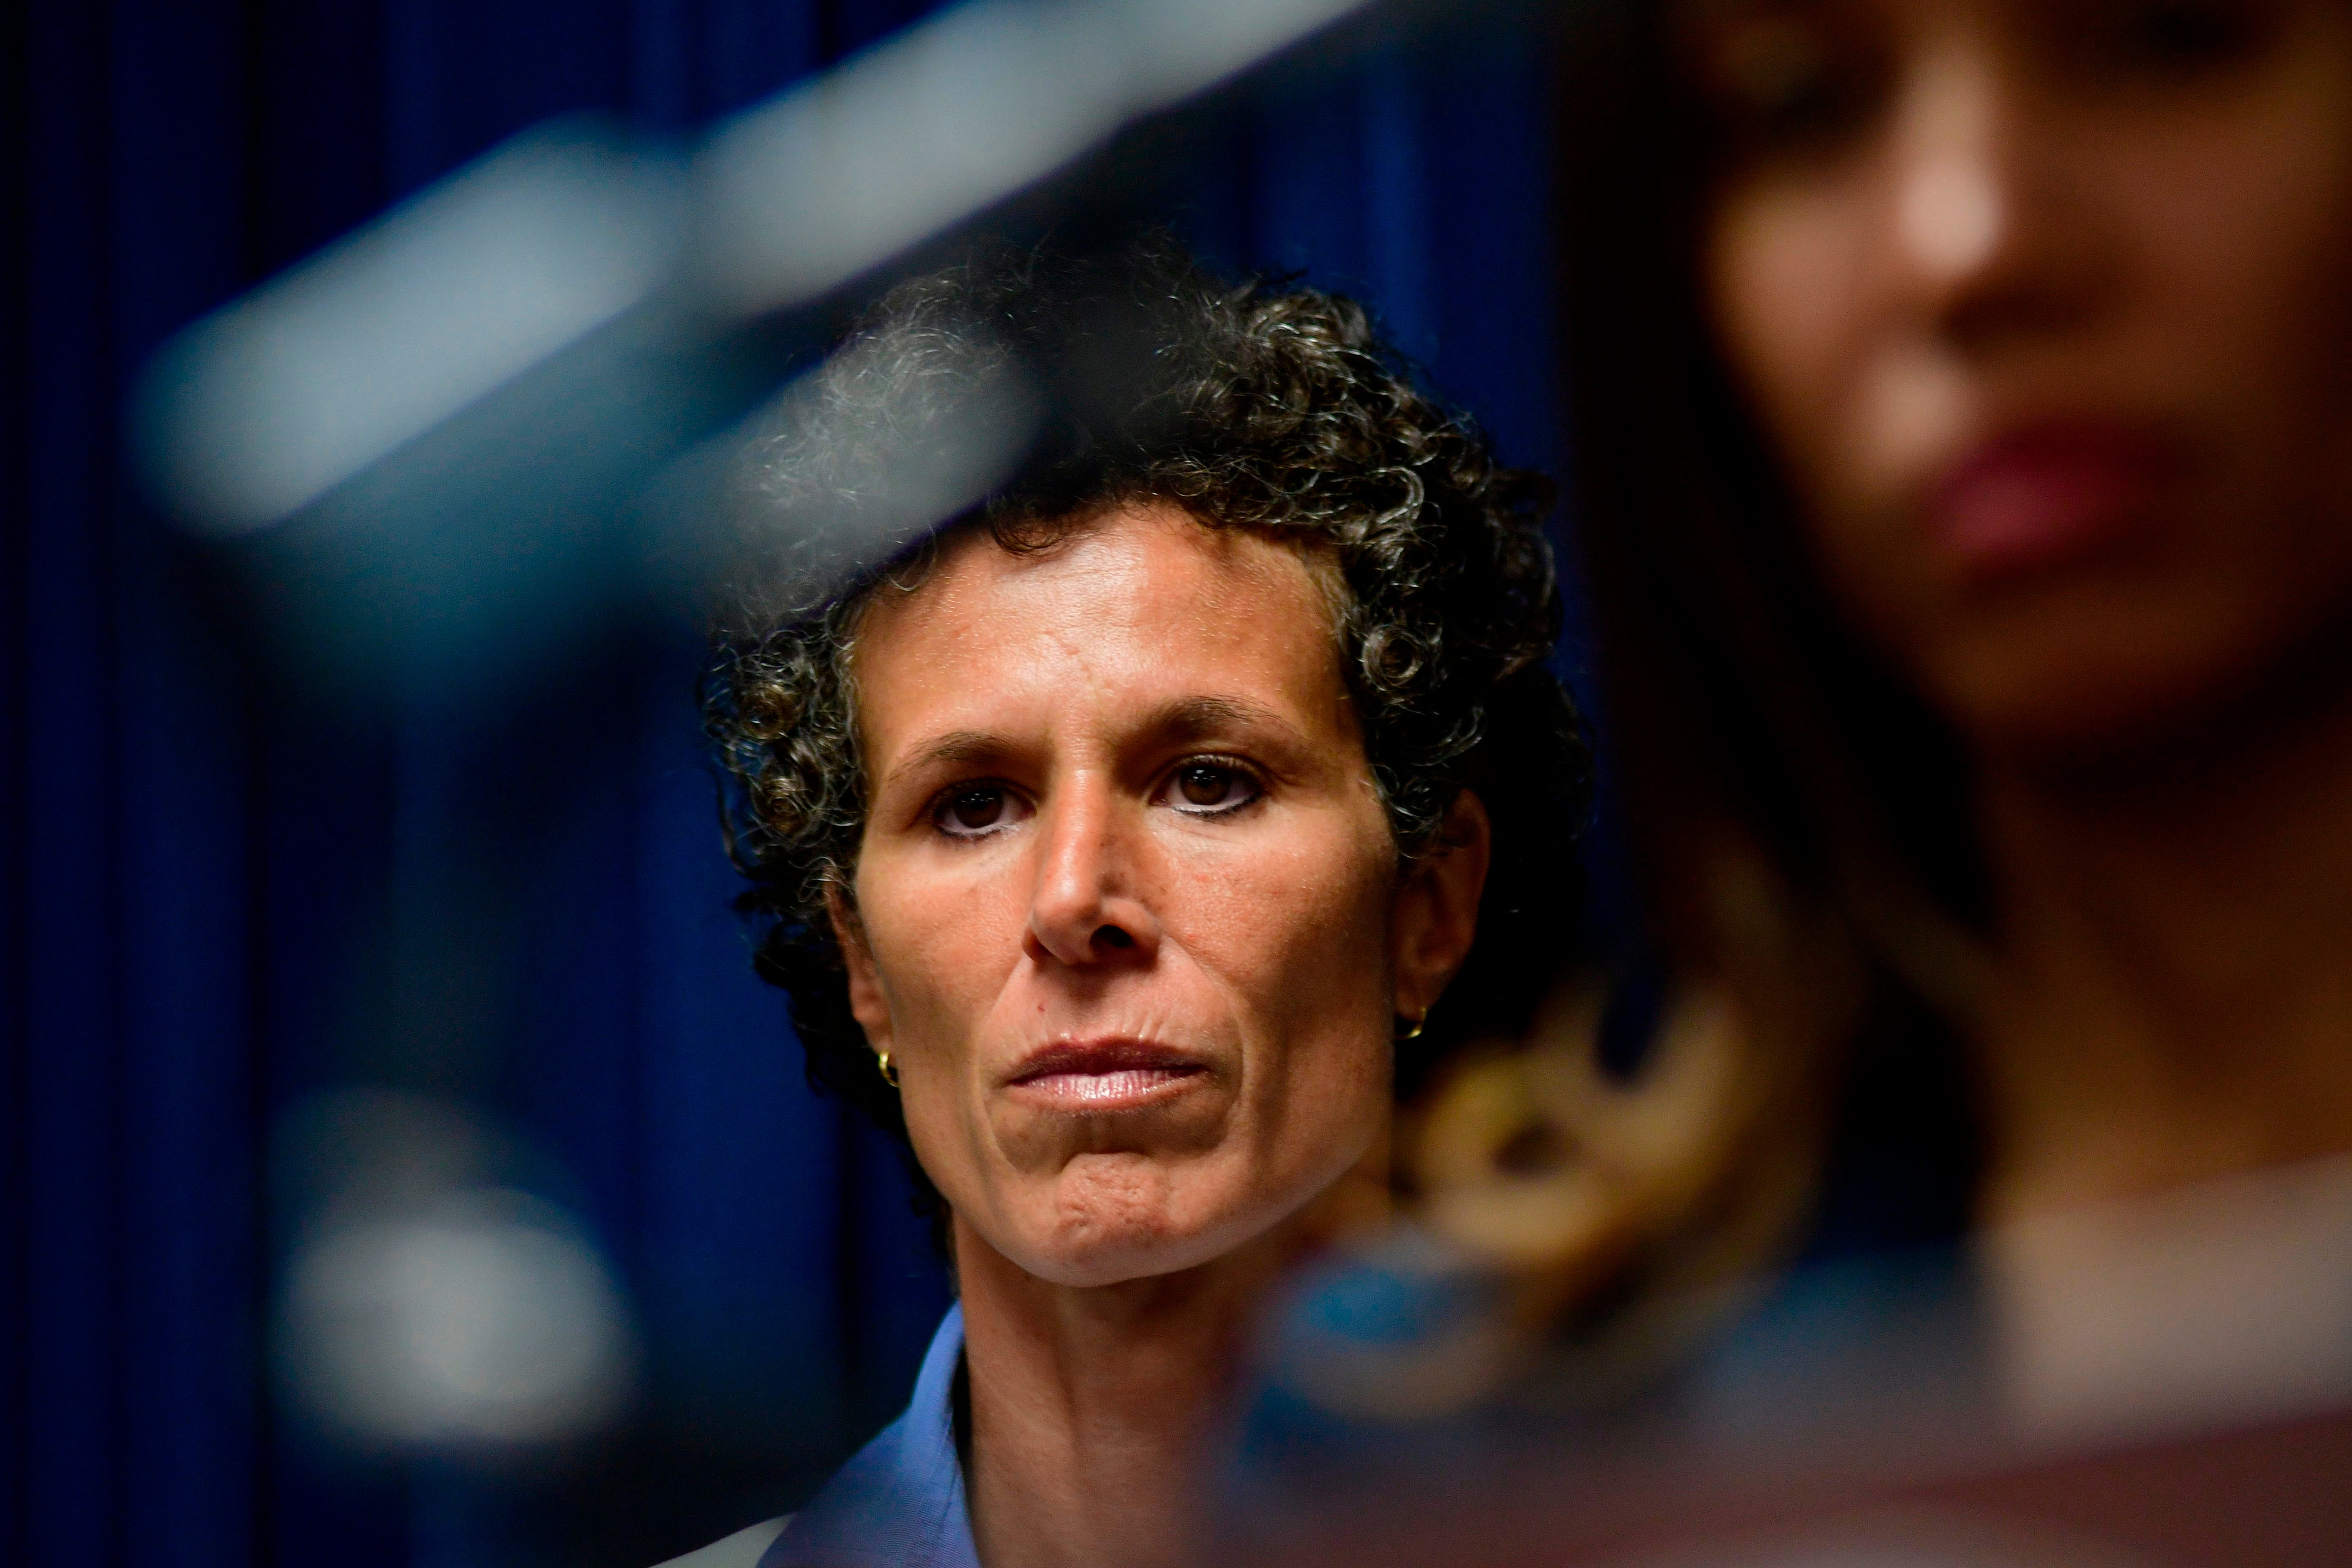 Andrea Constand Says She Has Forgiven Bill Cosby: 'He Needs Help'